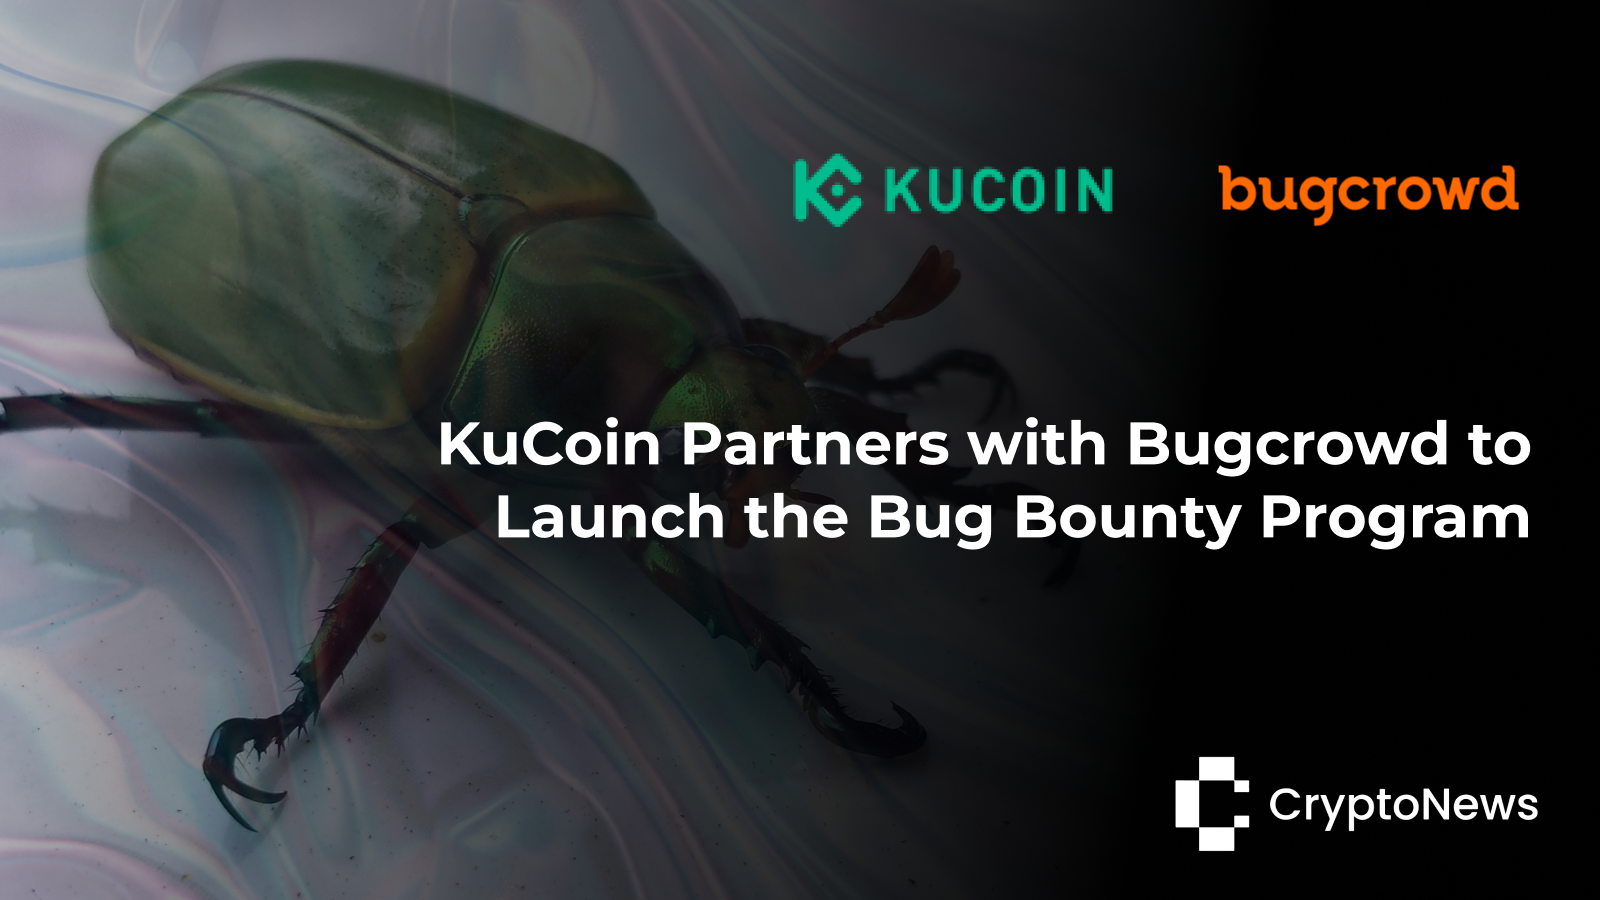 Image featuring the logos of Kucoin and Bugscrowd against a dark background with a bug, symbolizing their strategic partnership.